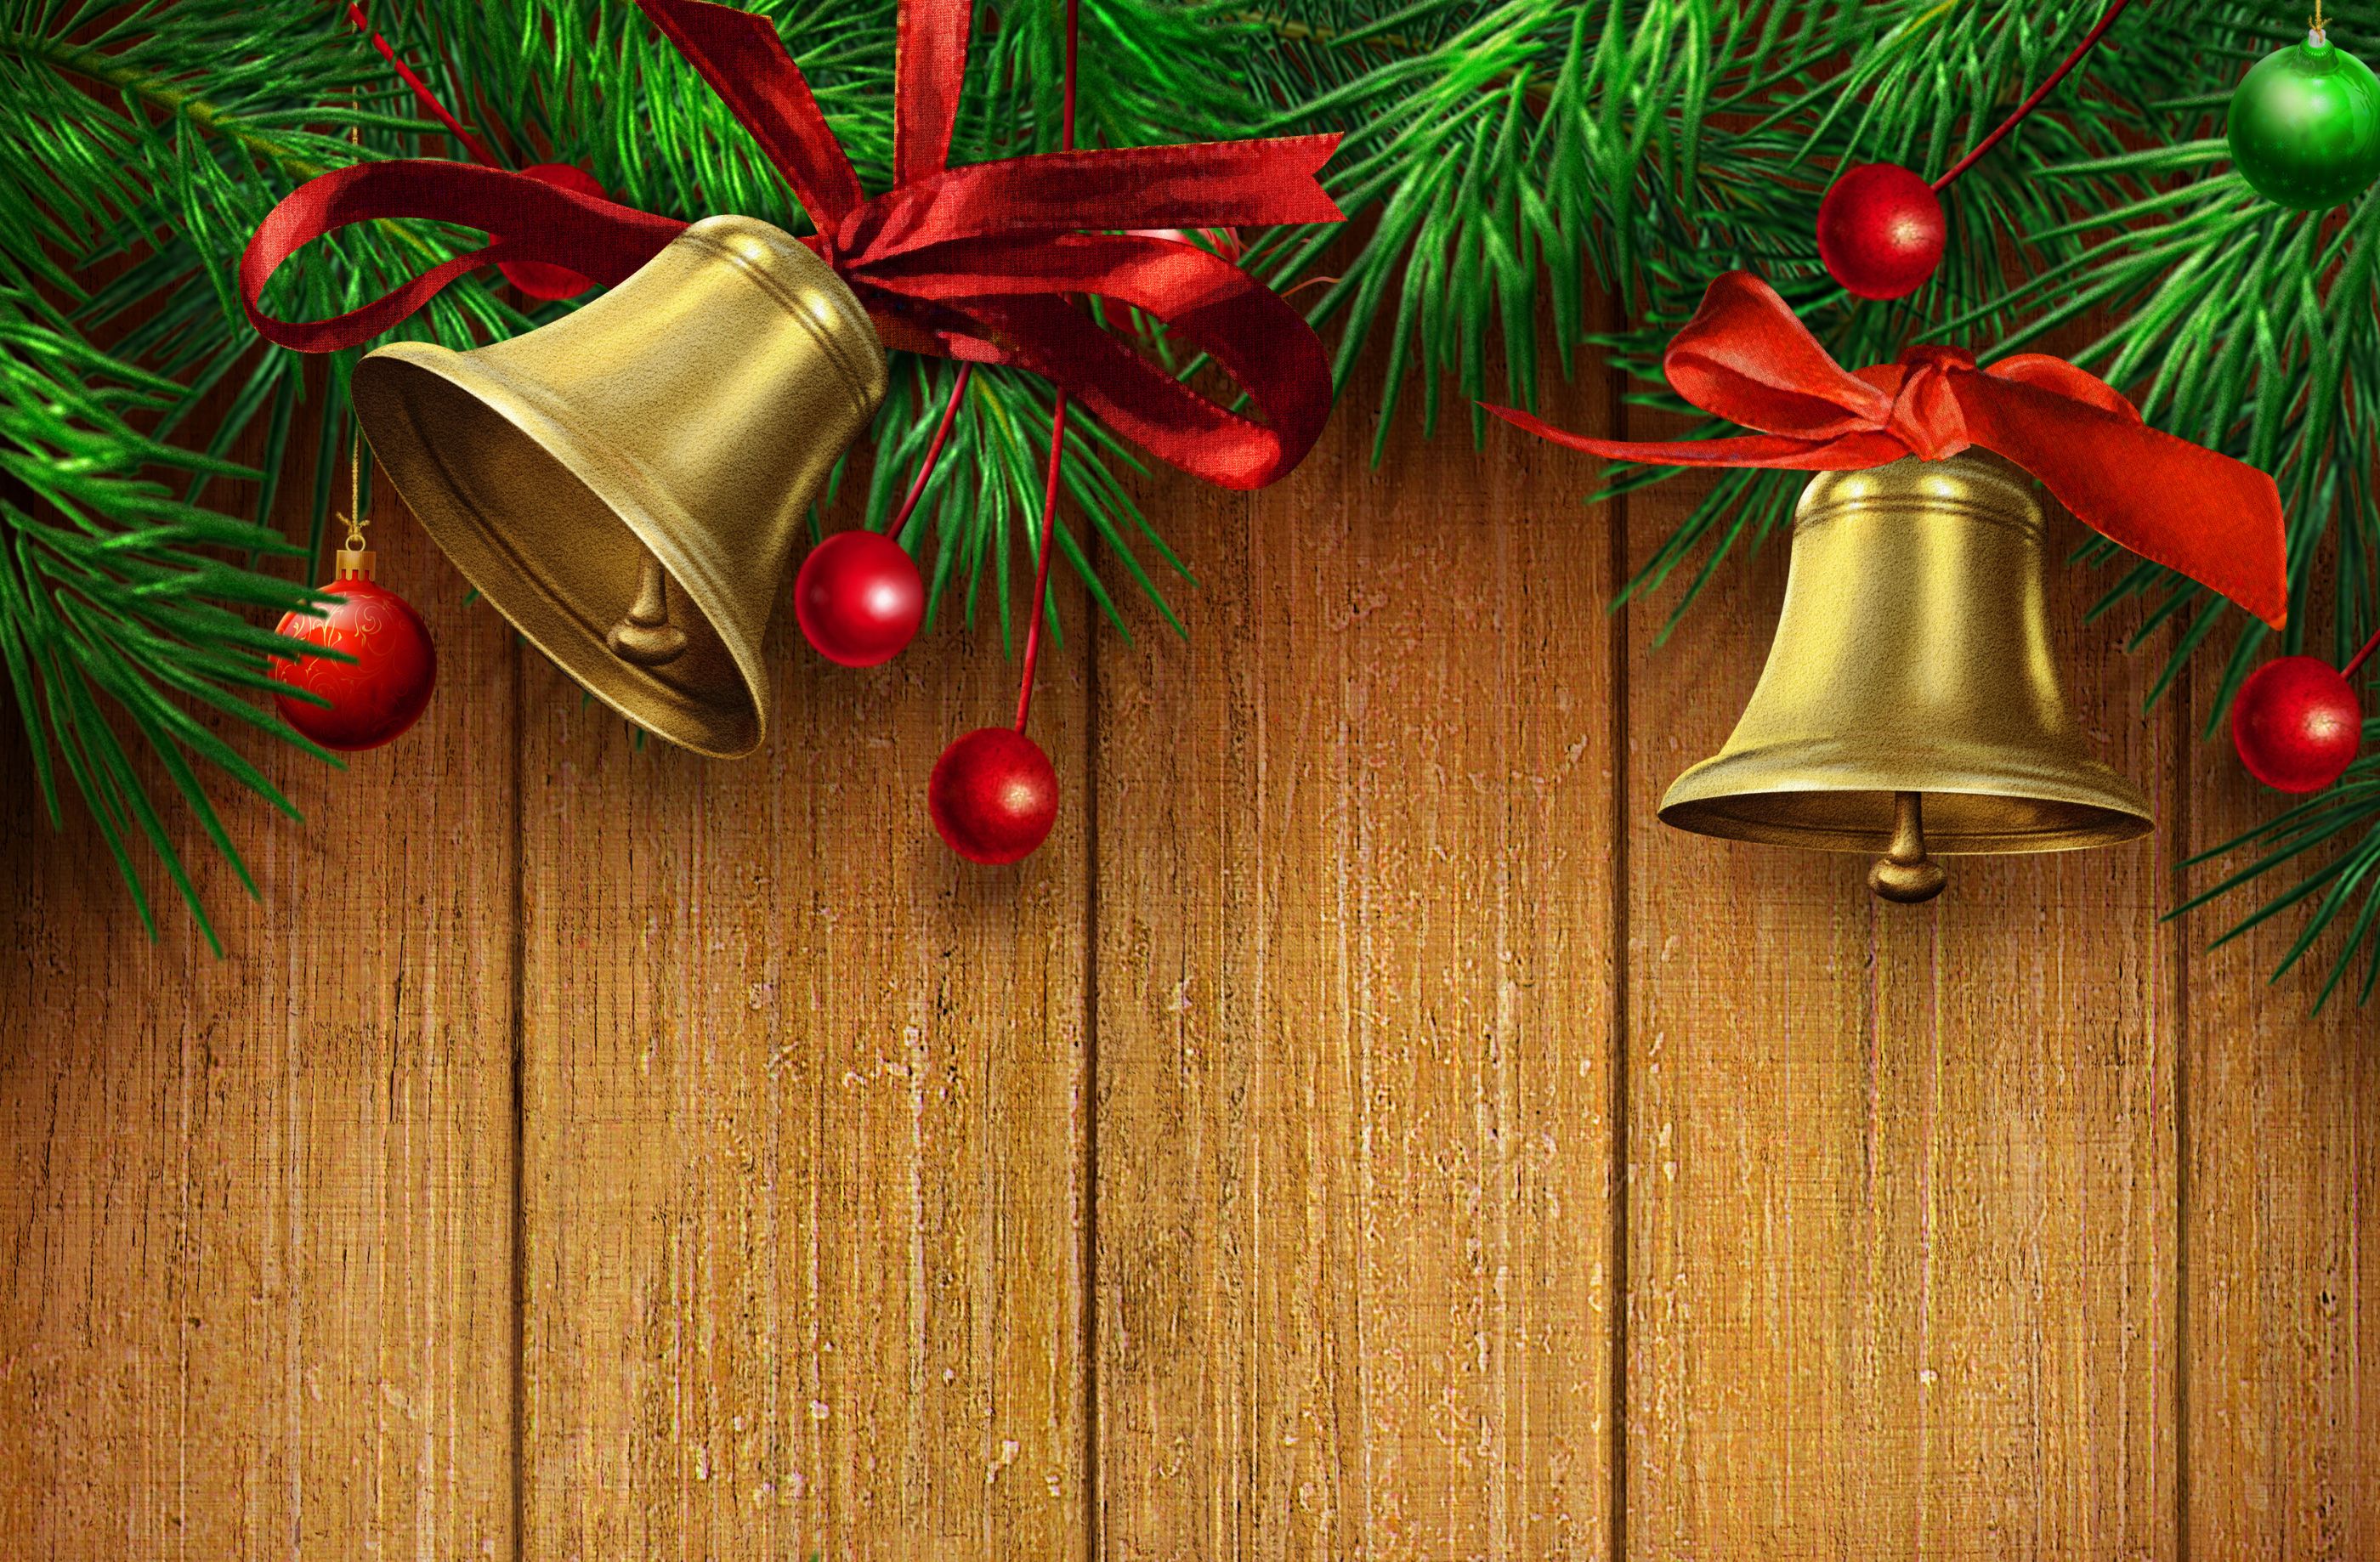 Christmas Wooden Background With Gold Bells And Red Ribbon Quality Image And Transparent PNG Free Clipart